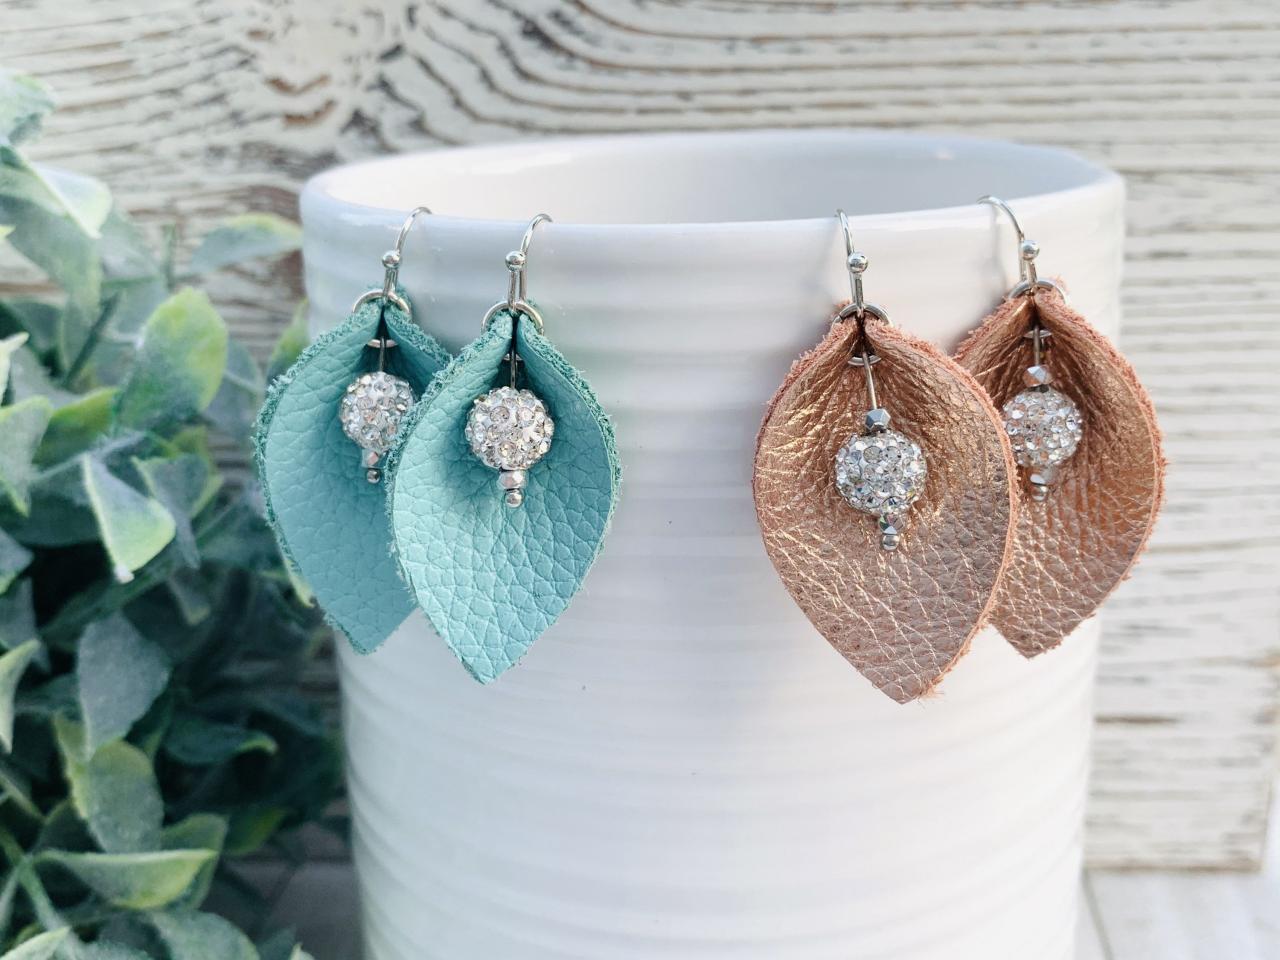 Leather Earrings | Teal Leather Earrings | Pinched Leather Earrings | Genuine Leather Earrings